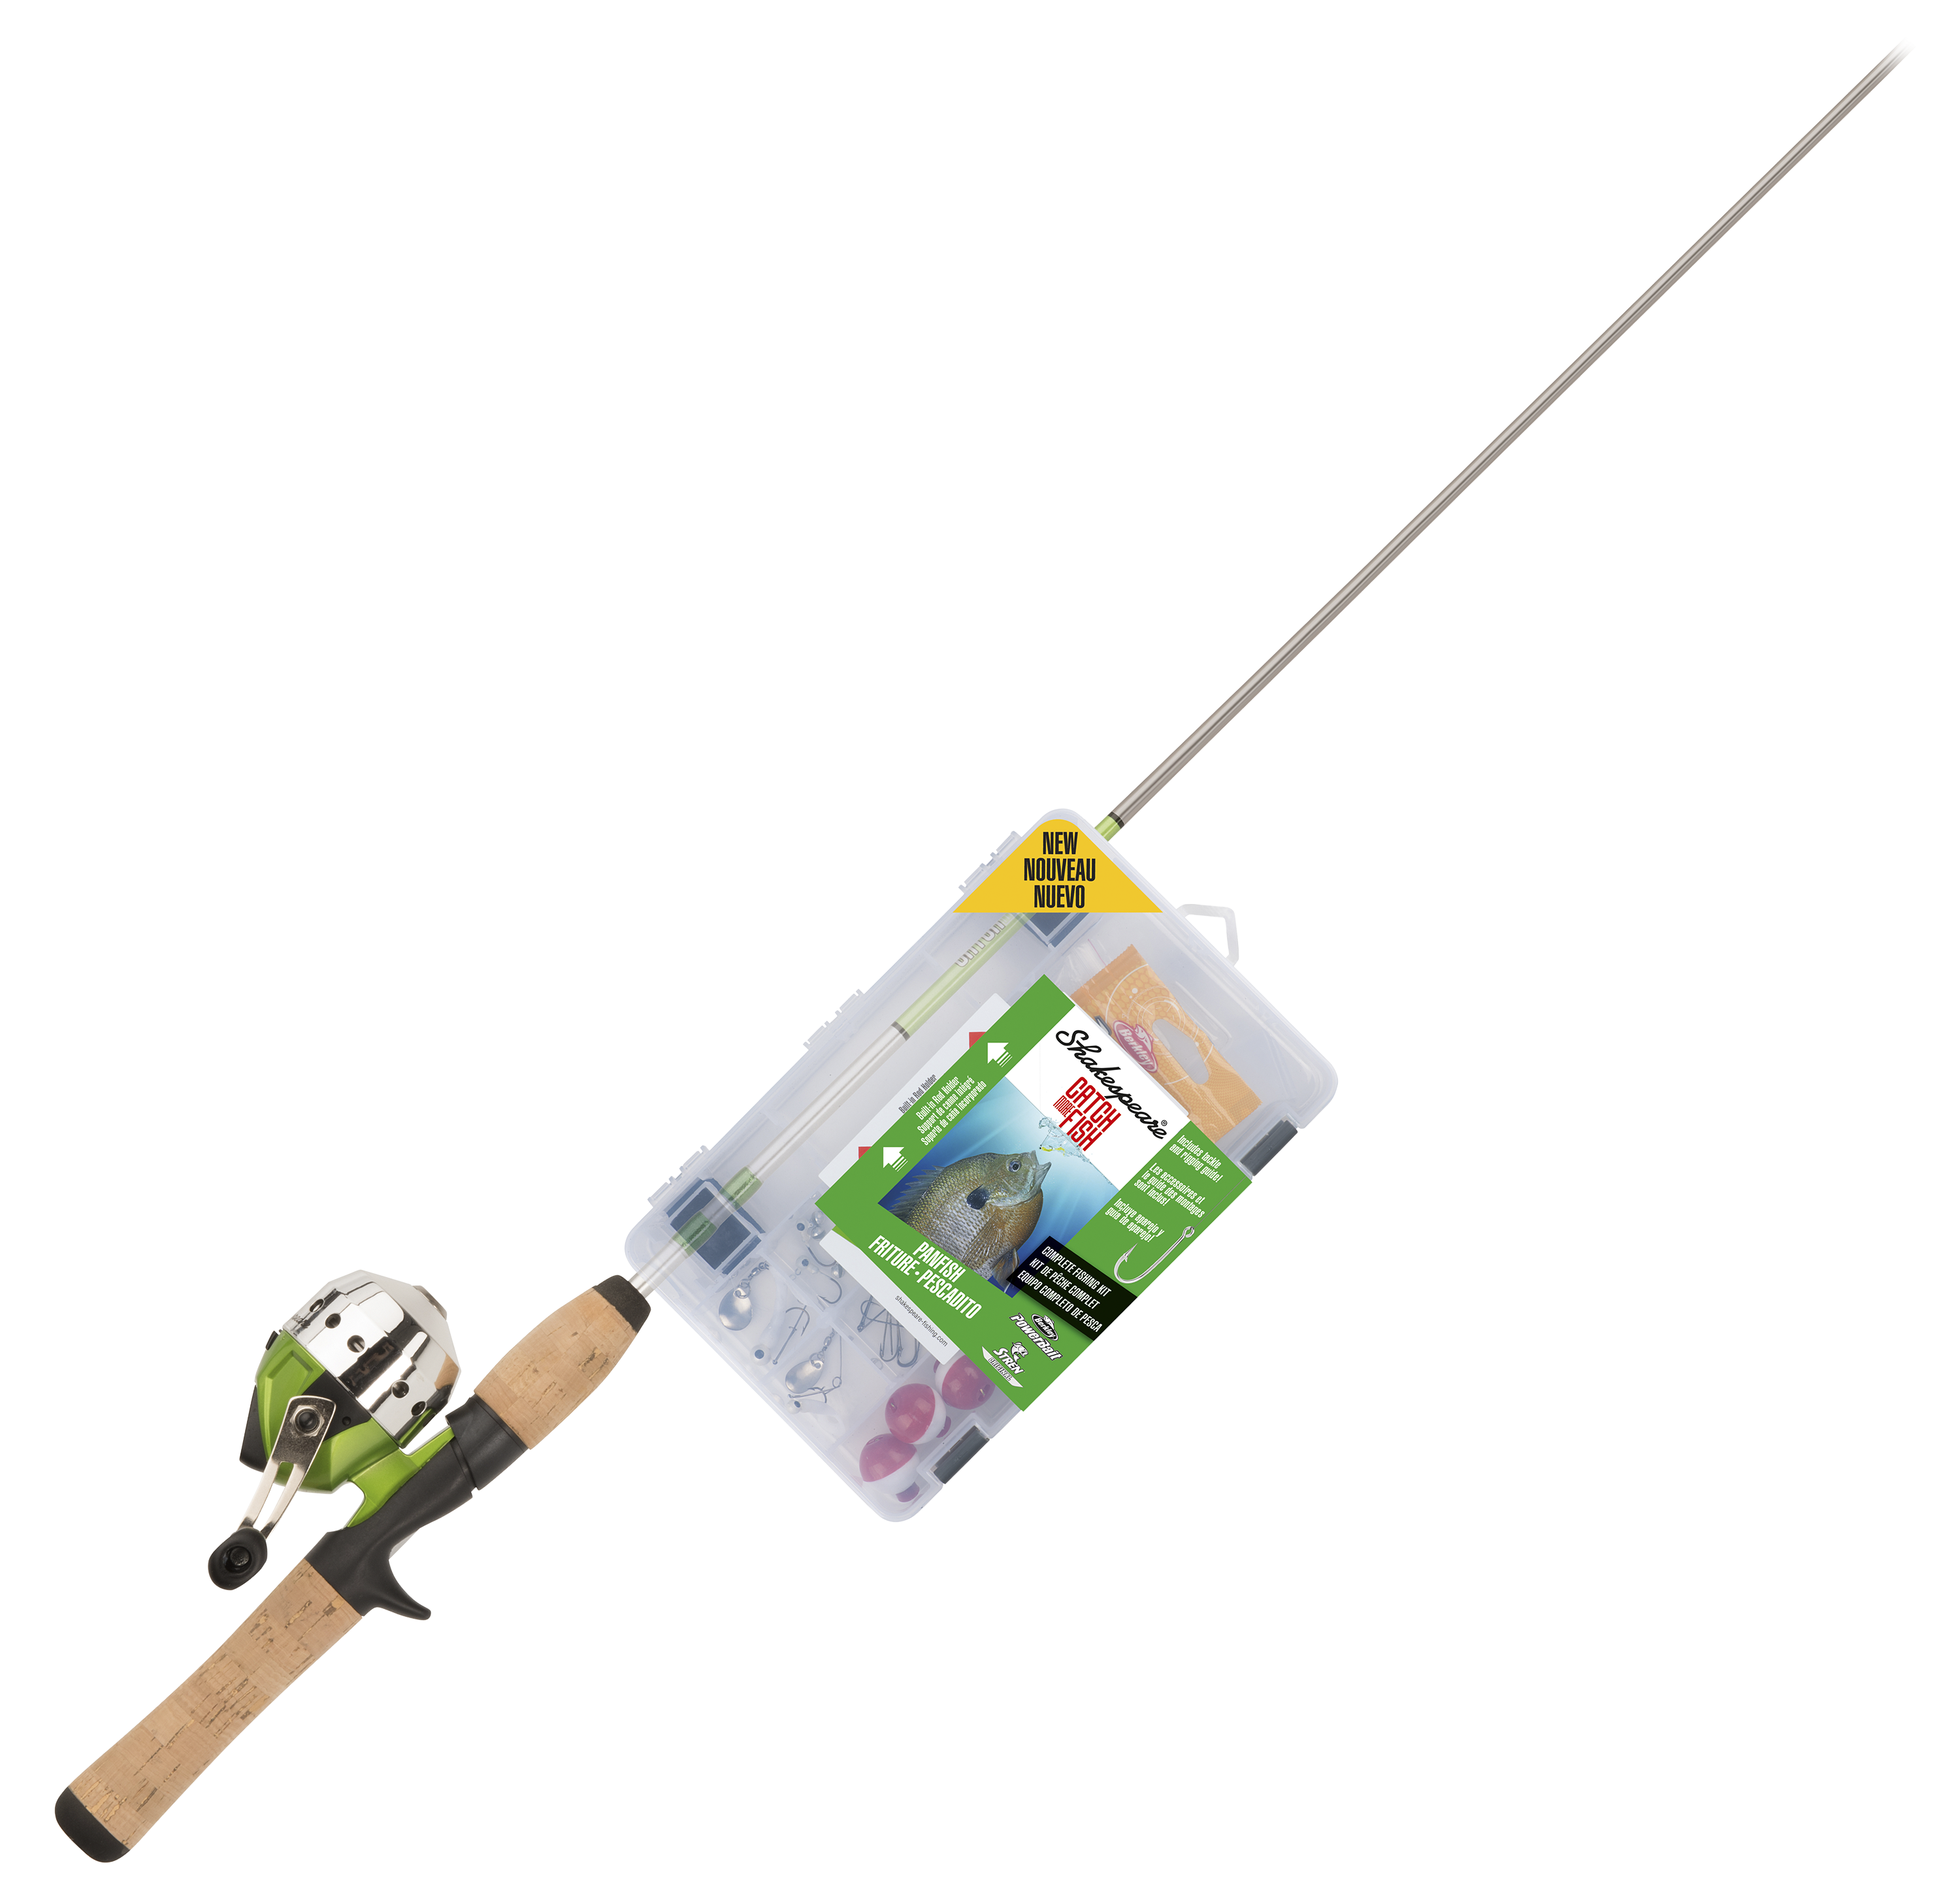 Shakespeare Catch More Fish Spincast Rod and Reel Combo for